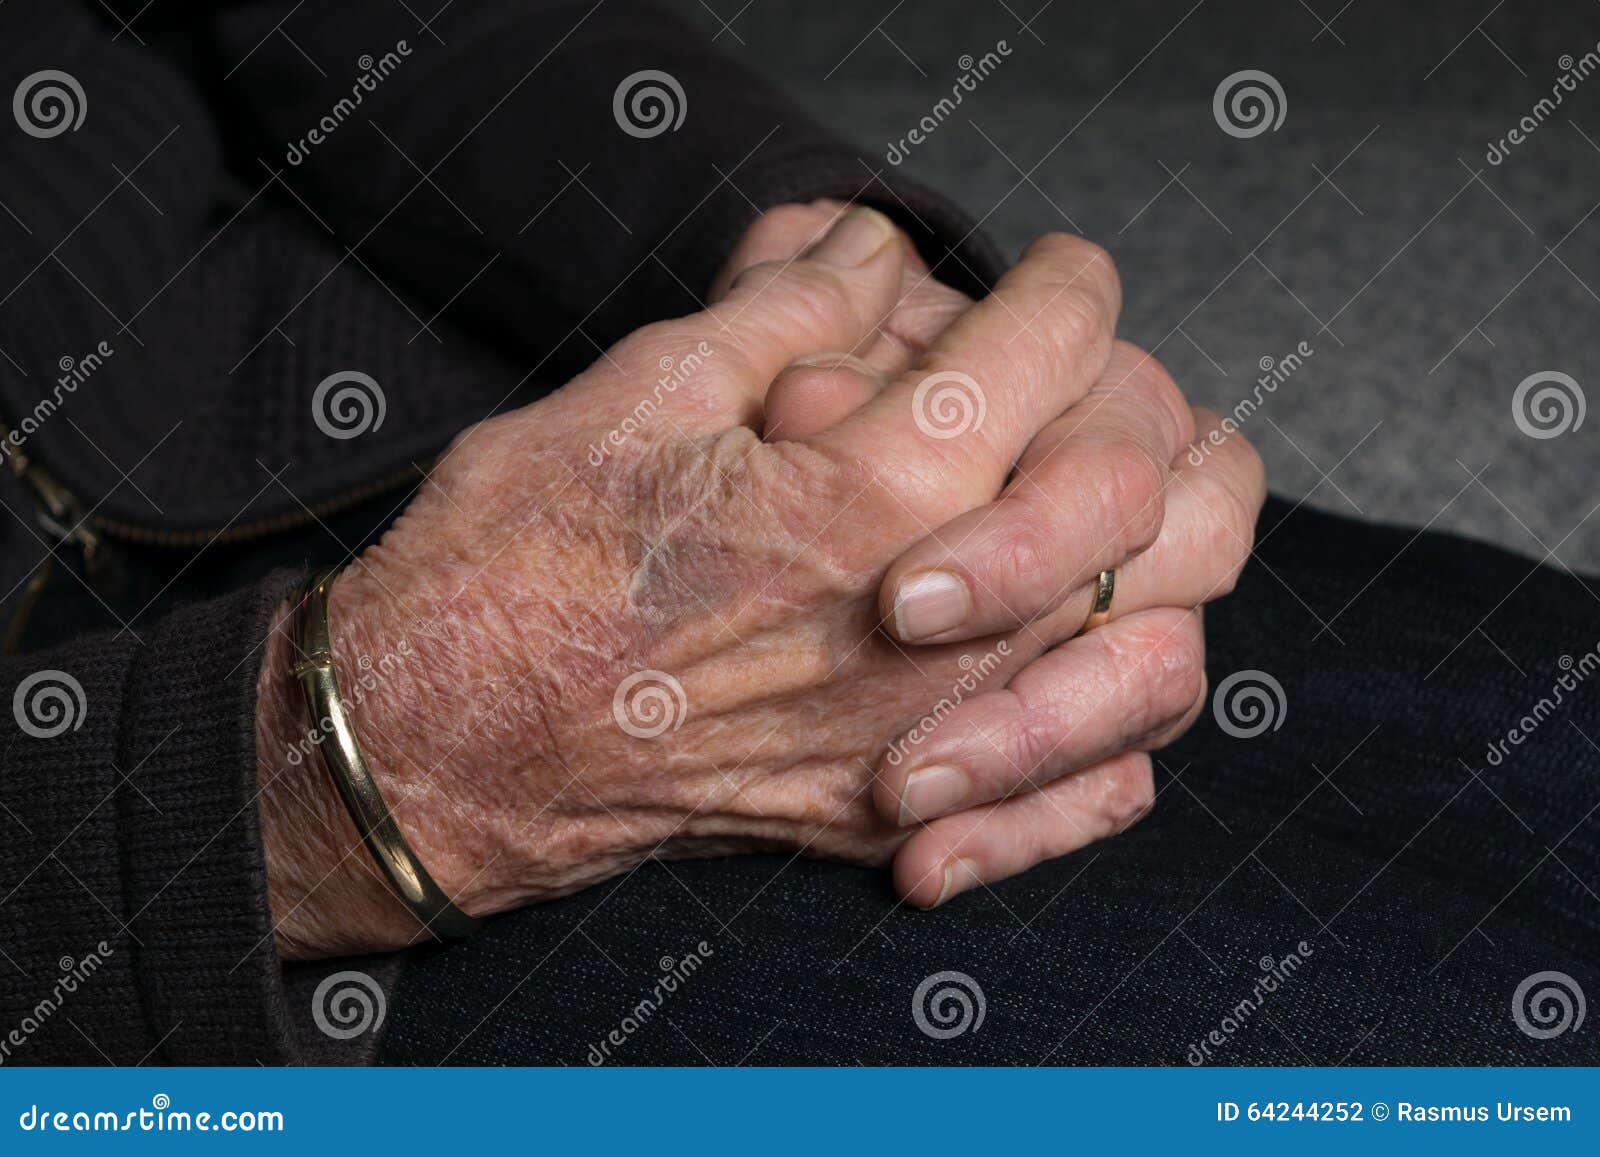 old lady hands with arthritis